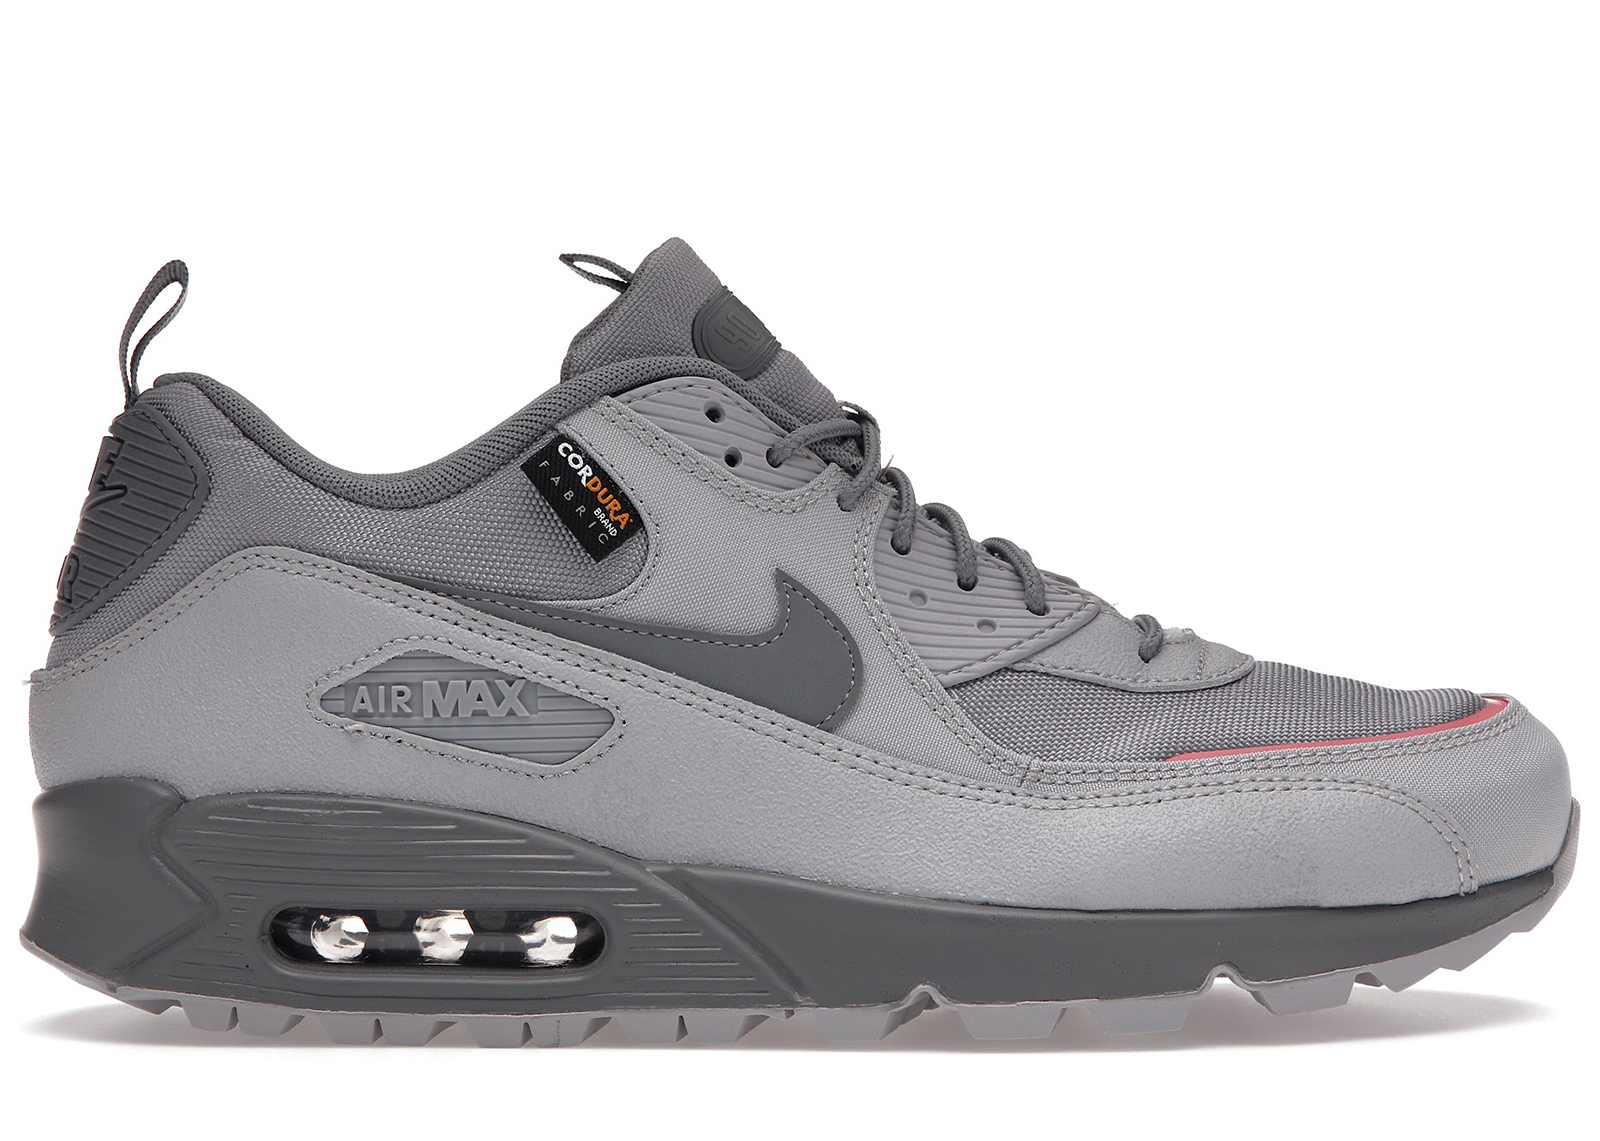 Buy Nike Air Max 90 Size 11.5 Shoes & New Sneakers - StockX